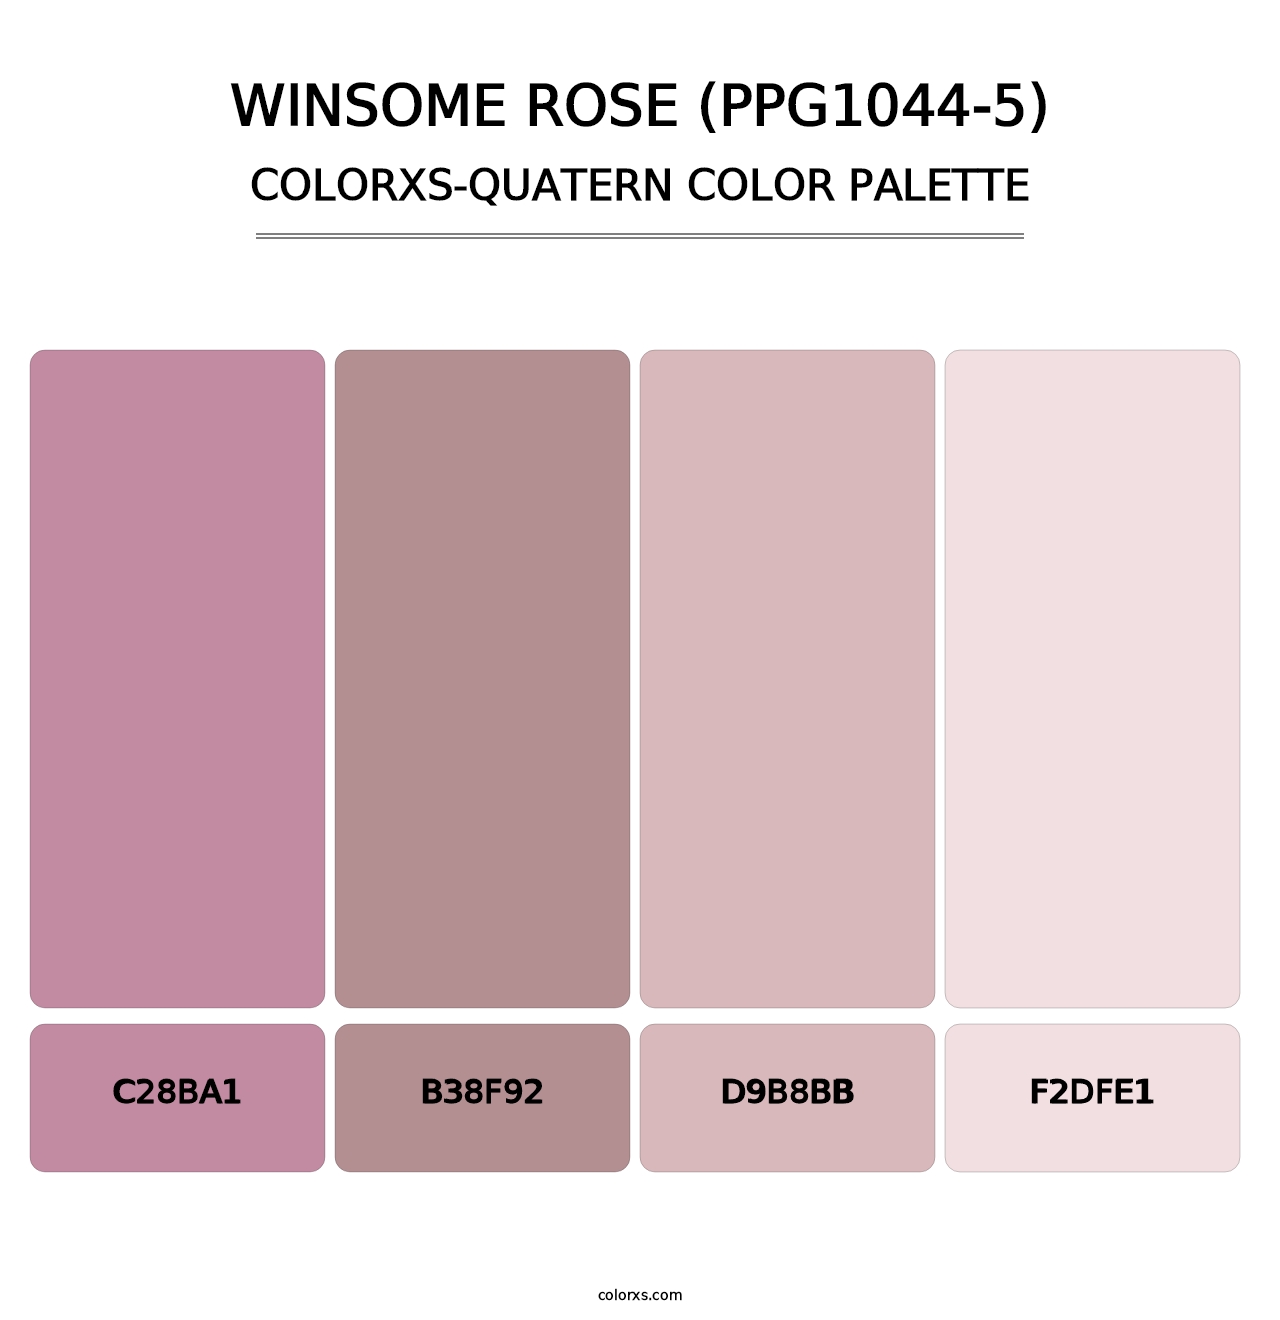 Winsome Rose (PPG1044-5) - Colorxs Quatern Palette